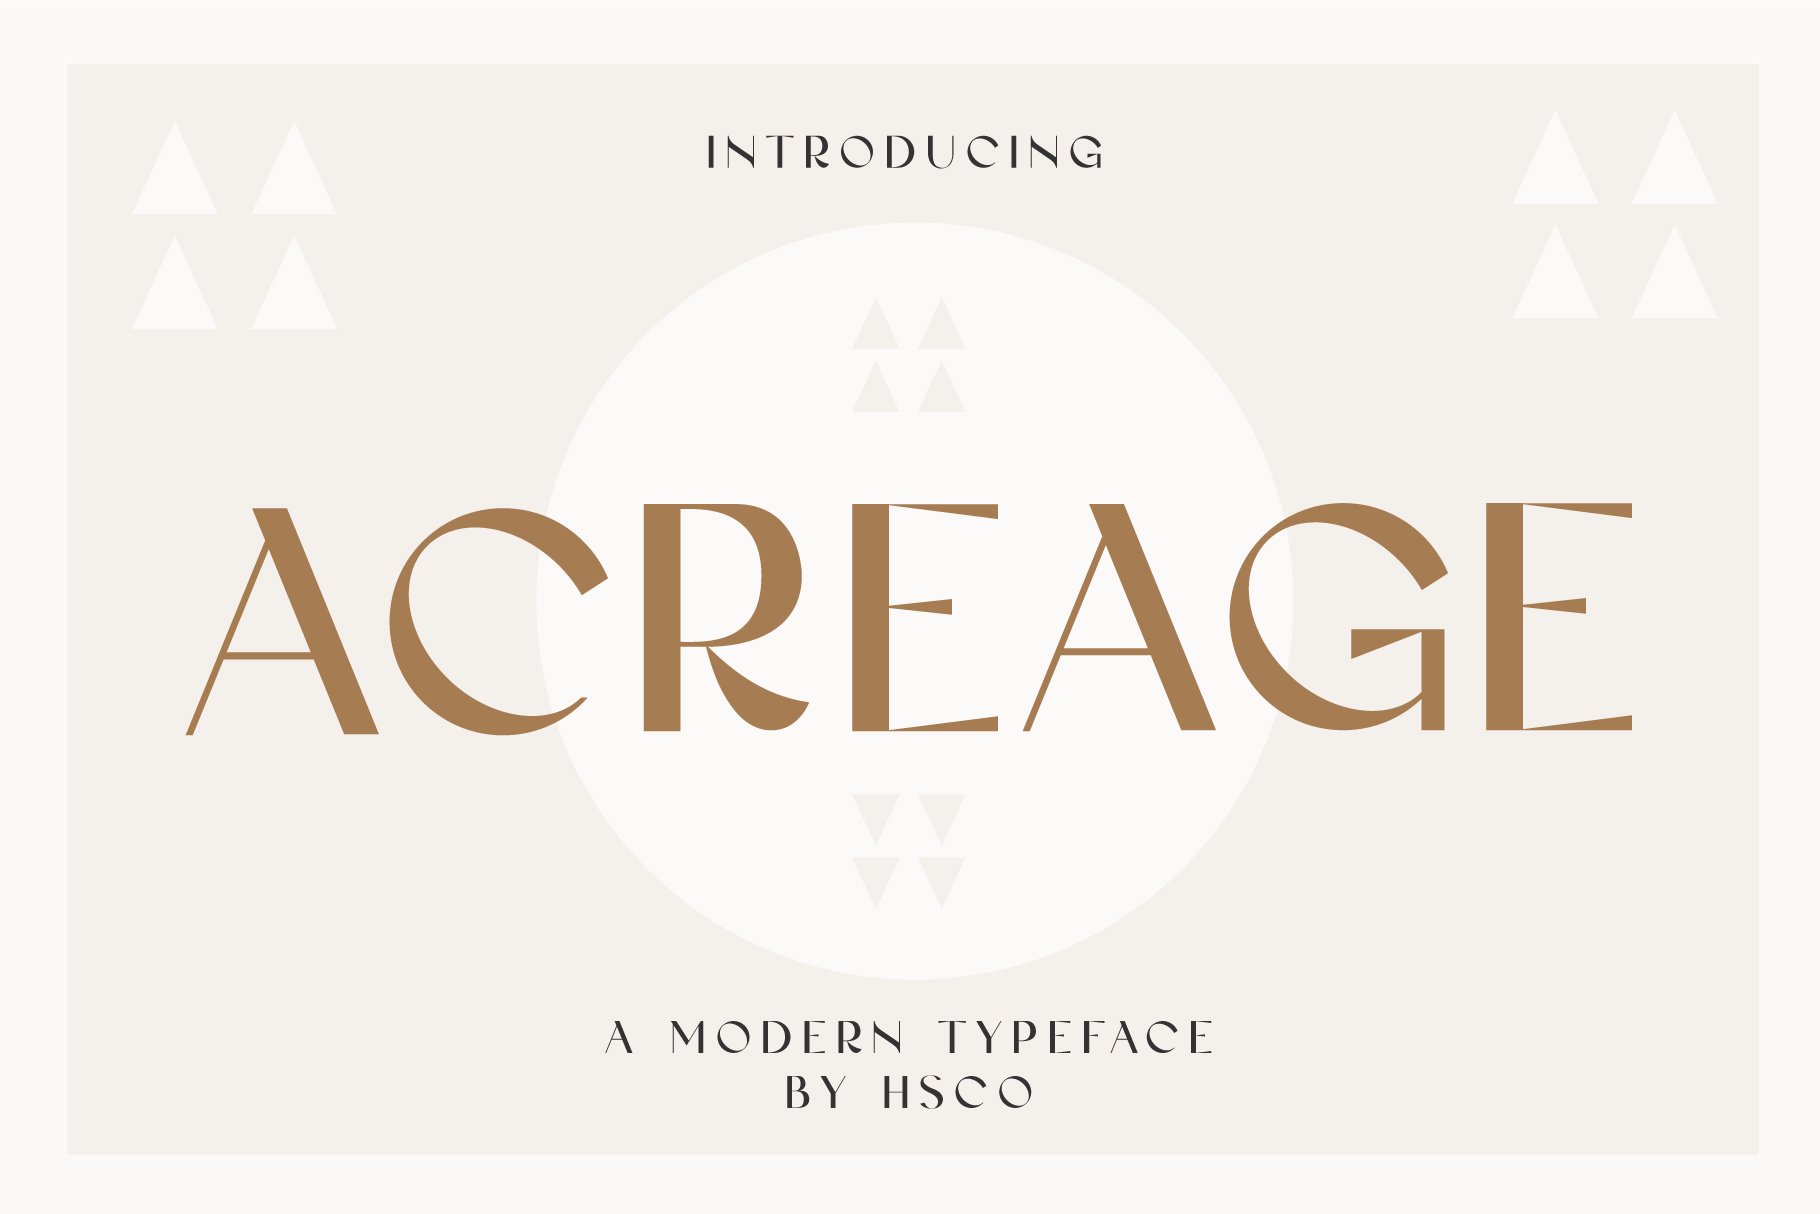 Acreage - A Modern Typeface cover image.